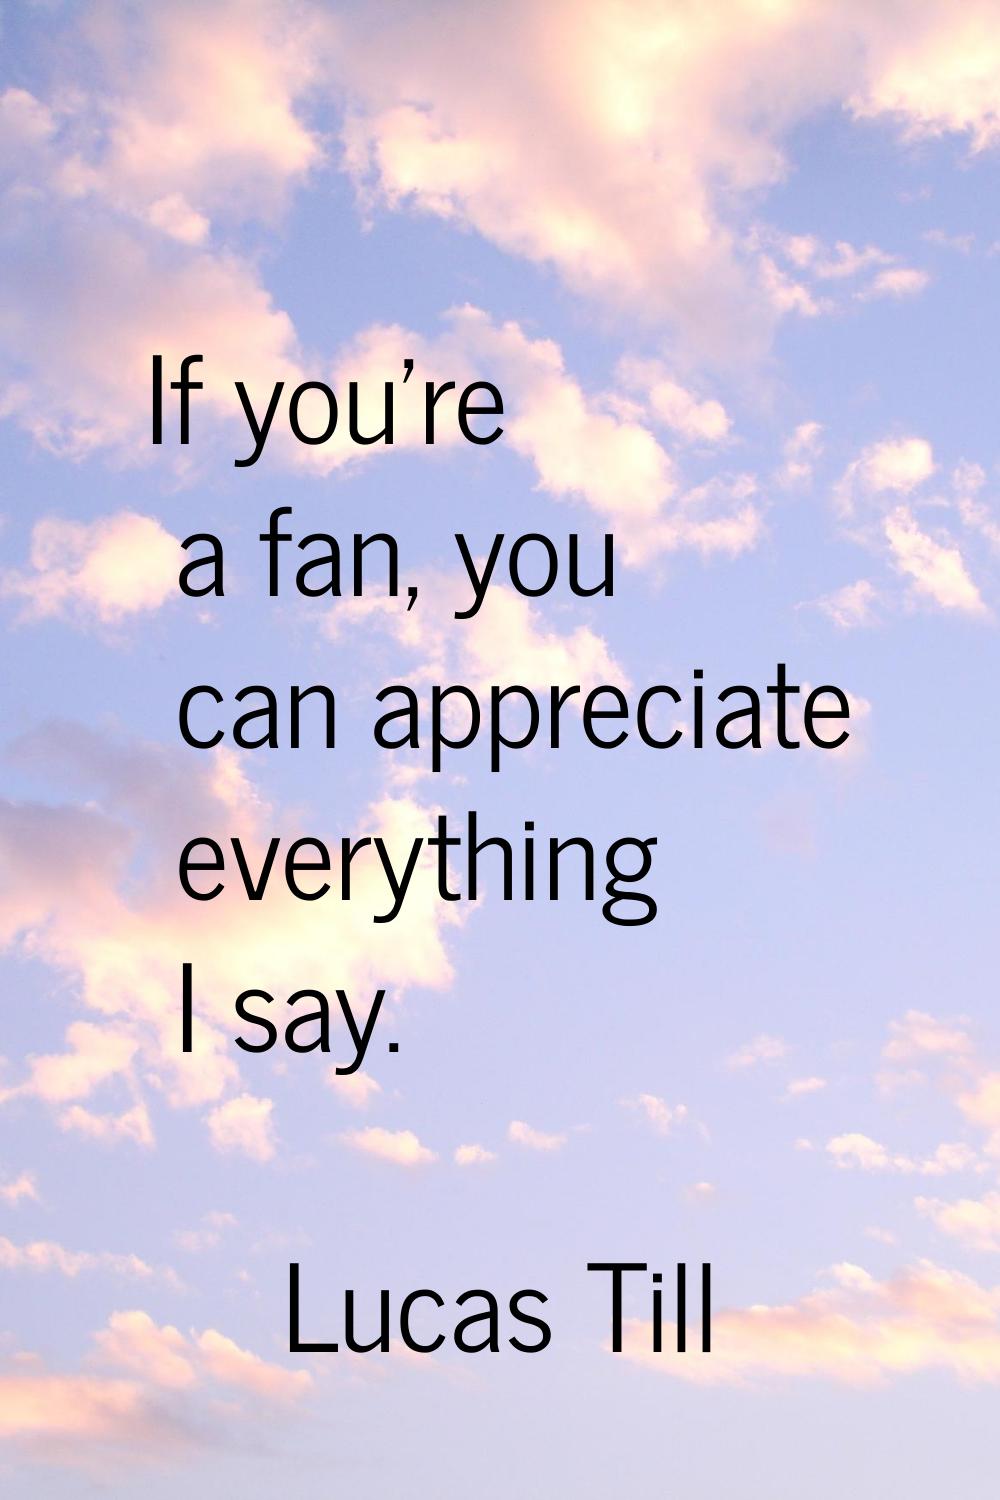 If you're a fan, you can appreciate everything I say.